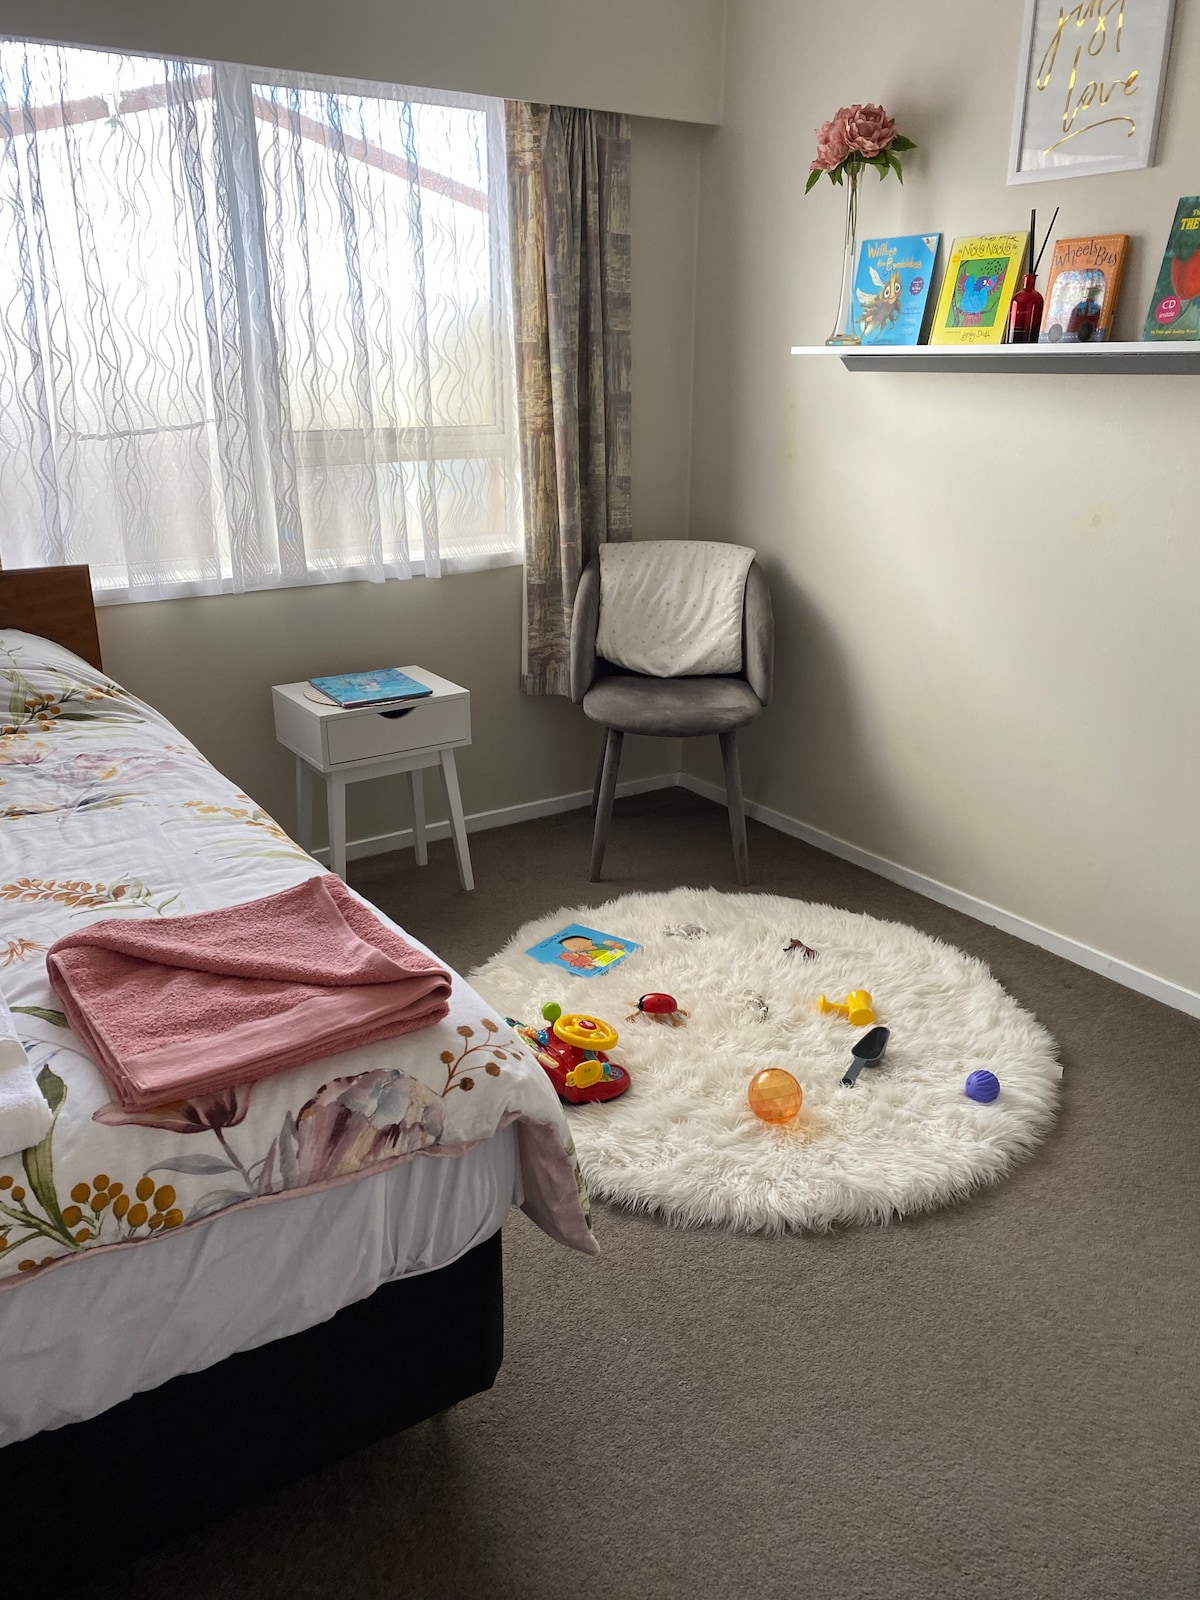 Quiet unit close to town child and dog friendly